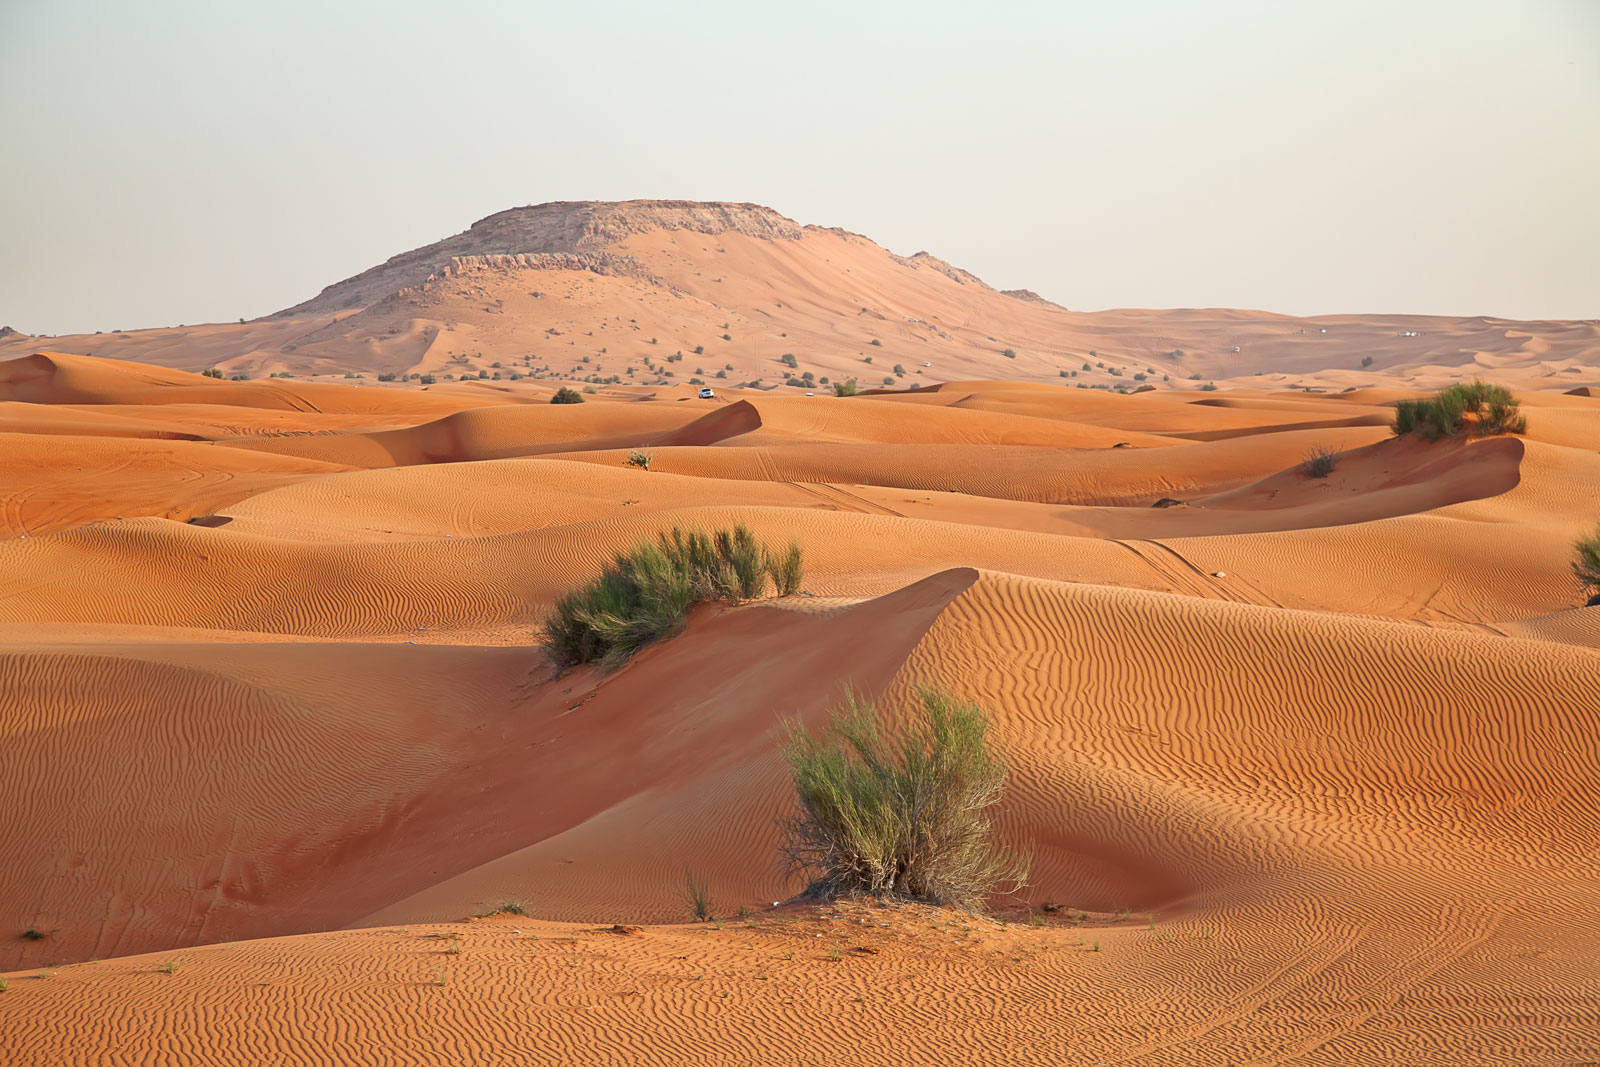 Can You Match These Natural Wonders to Their Locations? Arabian Desert